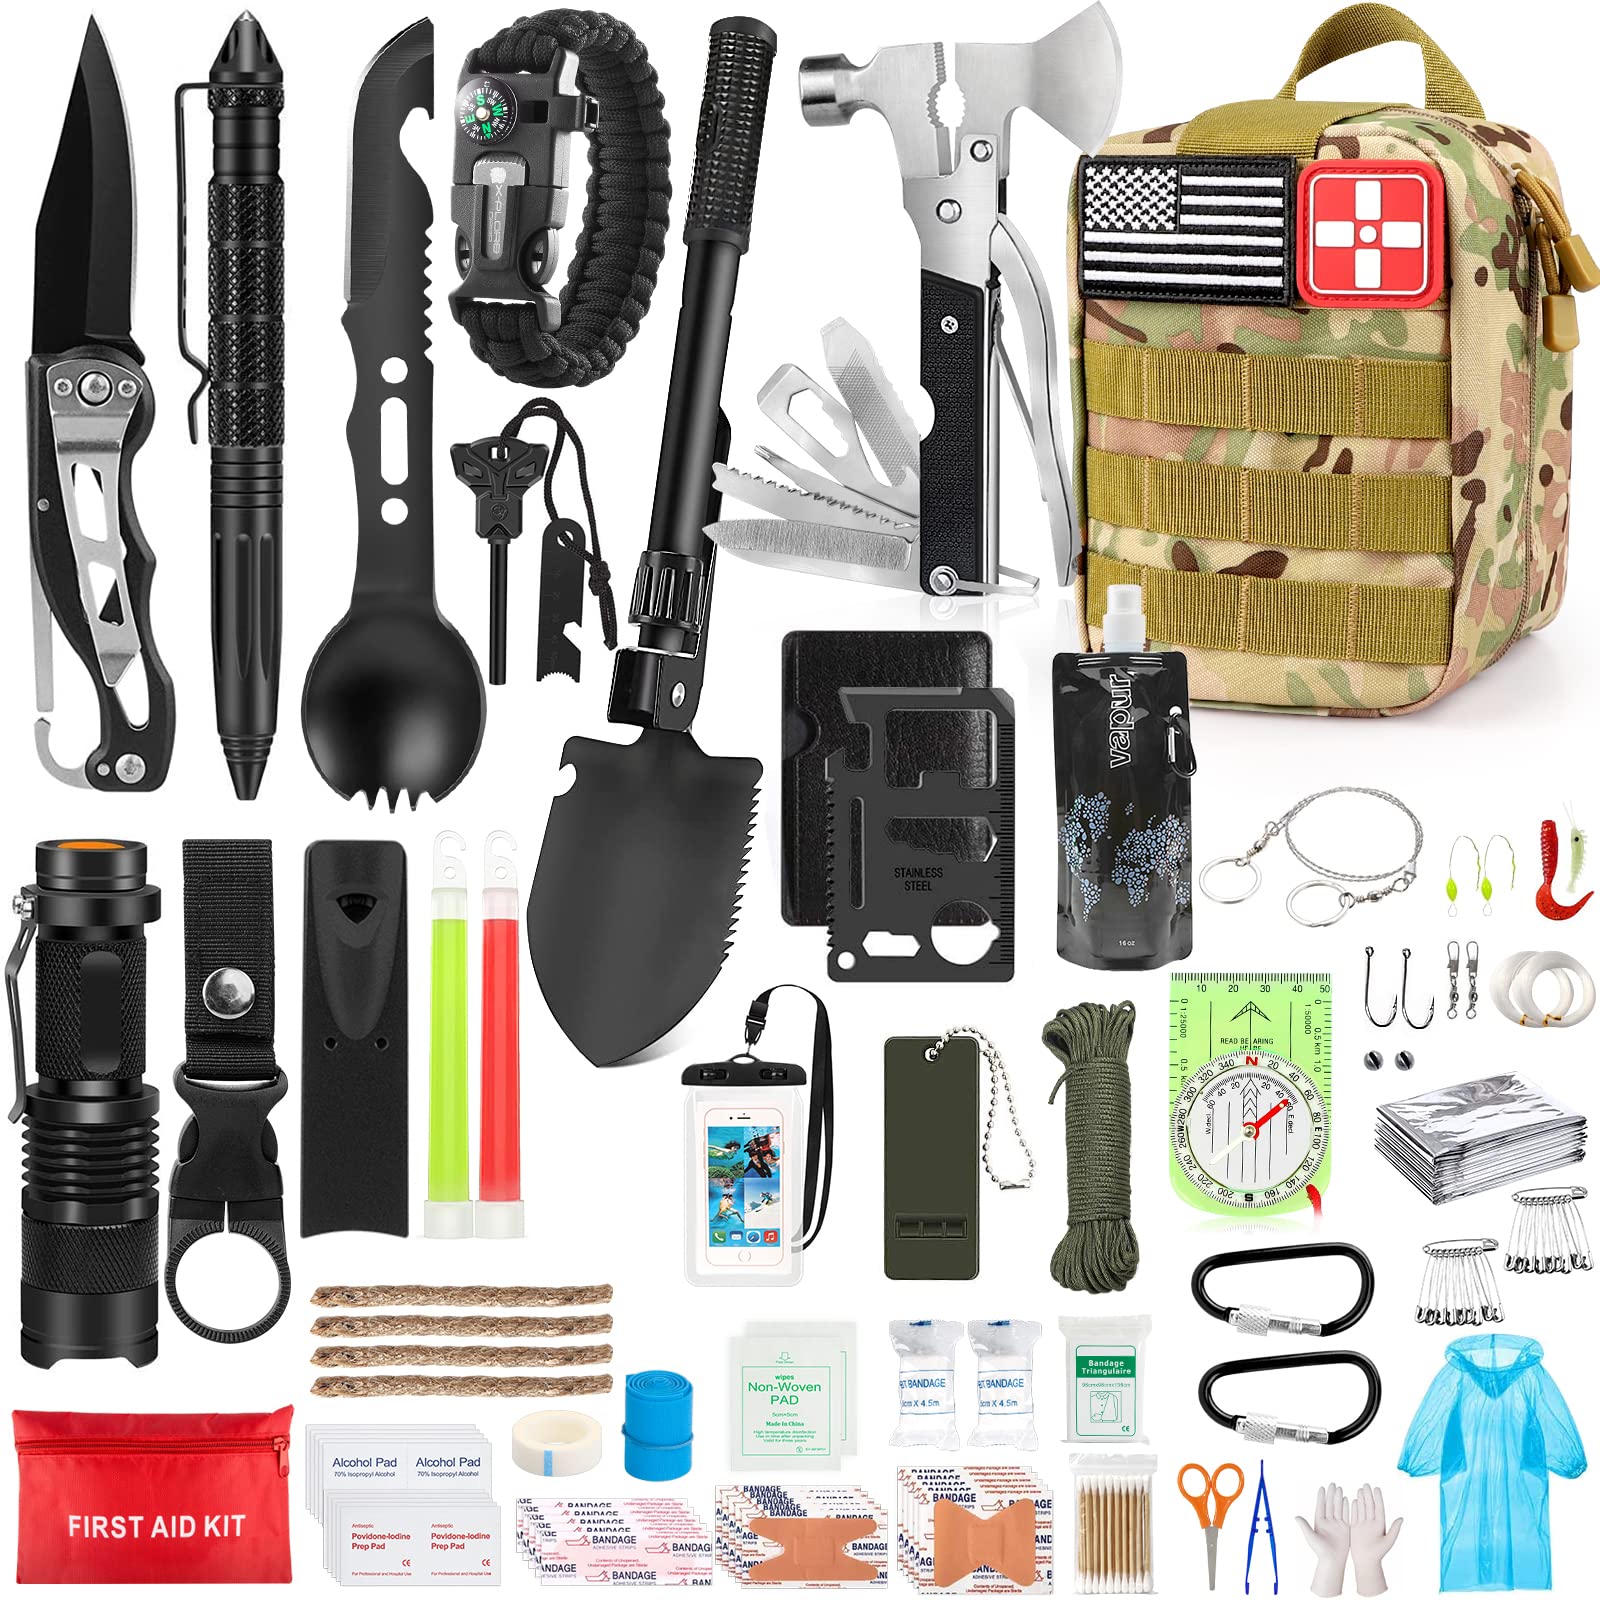  Kitgo Camping Emergency Tourniquet Survival Kit Safety First  Aid Kit for Friend with Pro Tool Outdoor Survival Gear Tactical Small Molle  Pouch for Home Hiking Hunting (Black) : Sports & Outdoors